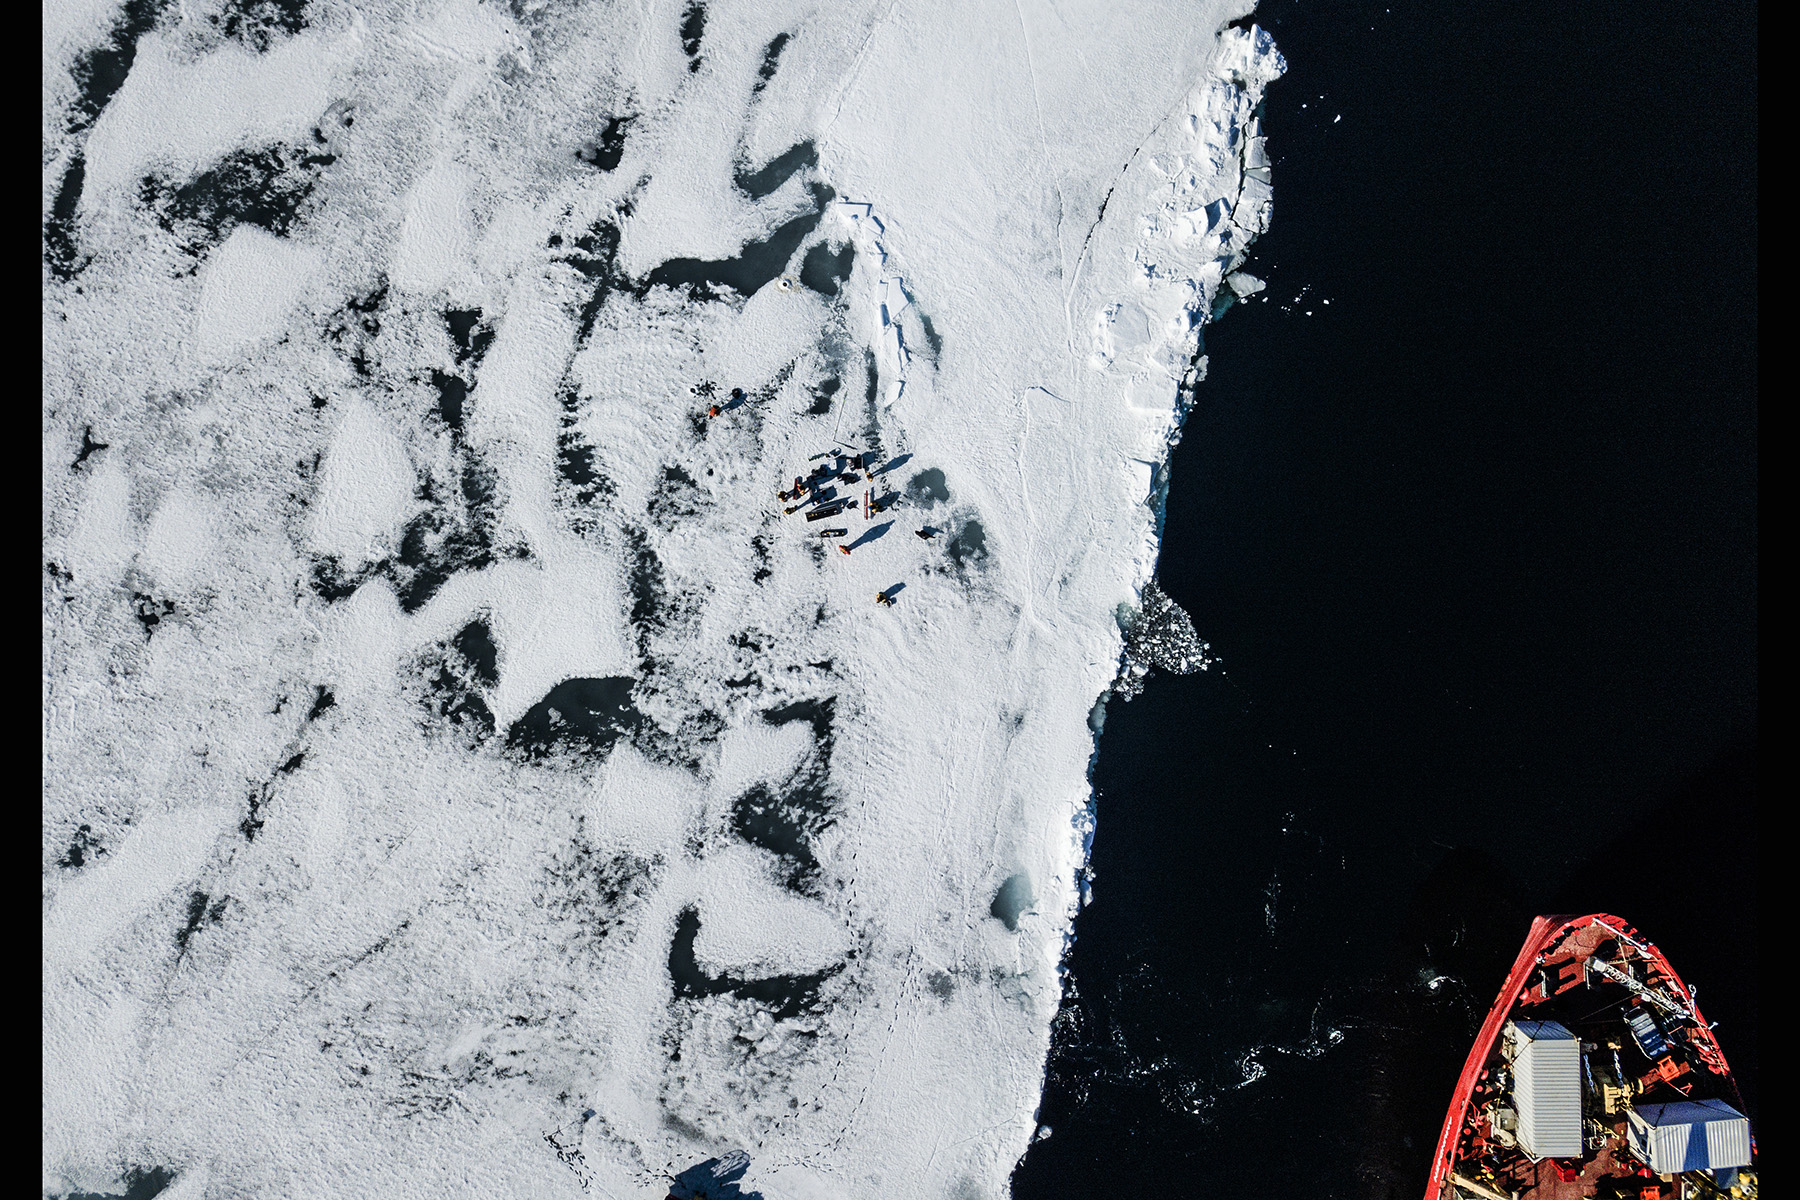  Canada, Nunavut, Kangiqsualuk Ilua (Hudson Bay), June 2018

An aerial of the Amundsen, which is an icebreaker from the Canadian coastguard, which is also partly has been converted to a science lab. 
An international team of scientists specialised in